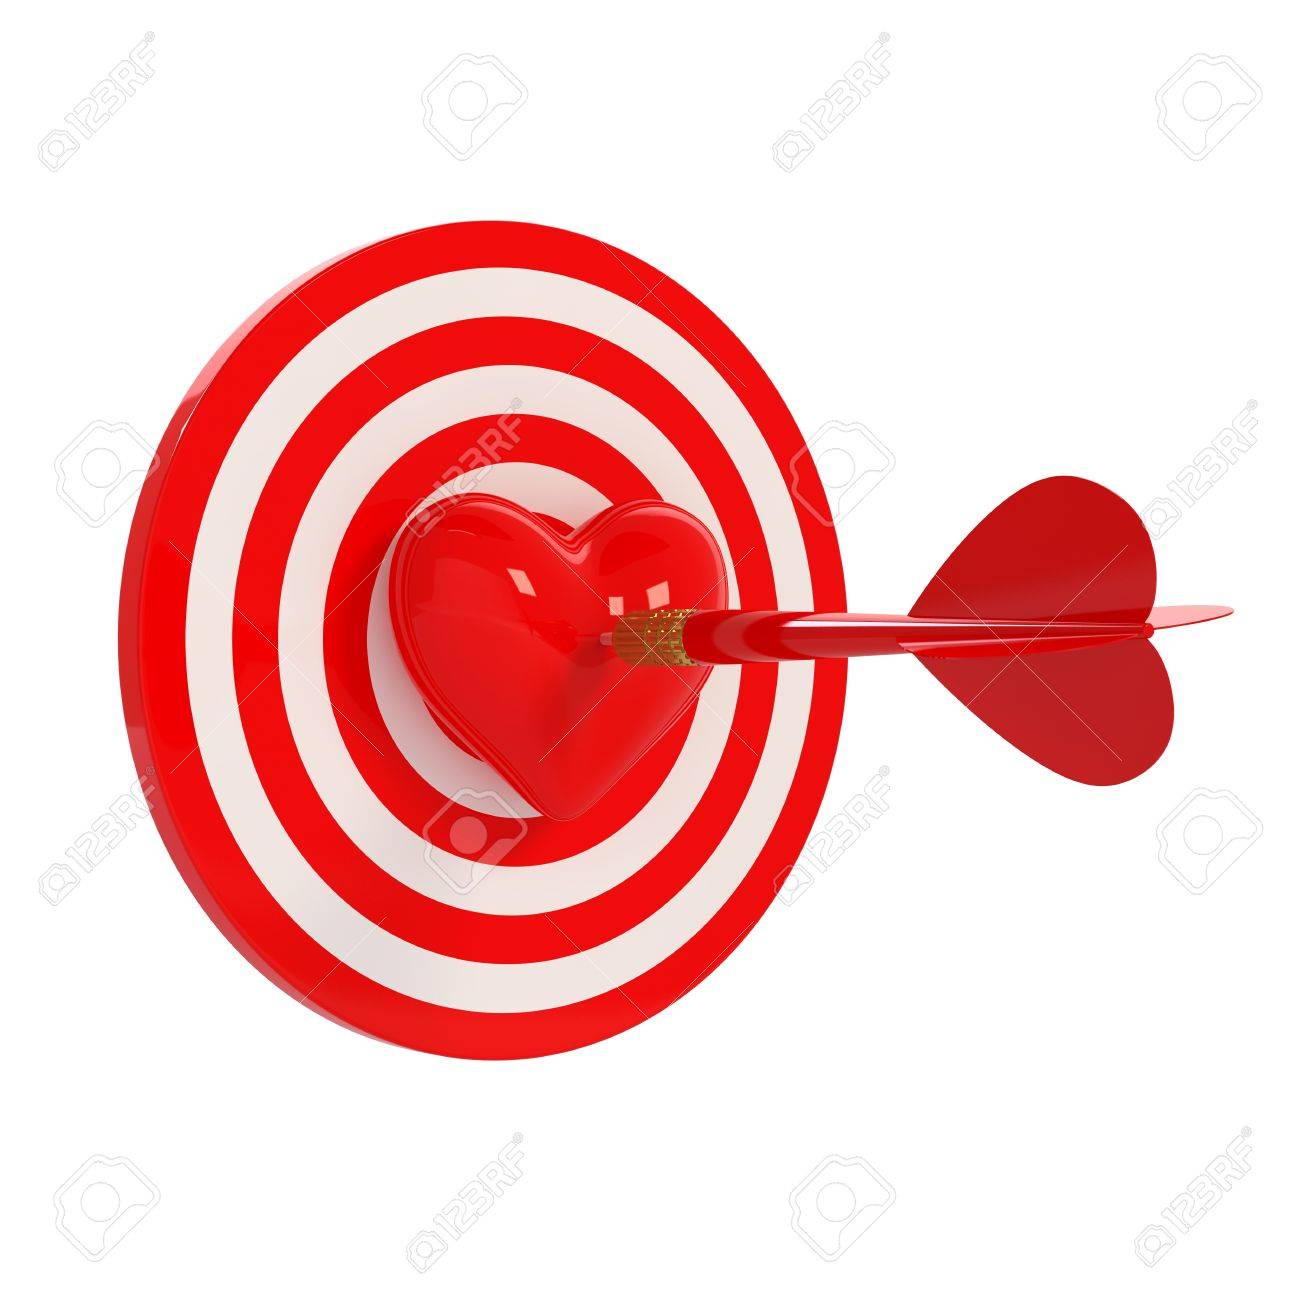 Picture Of A Target